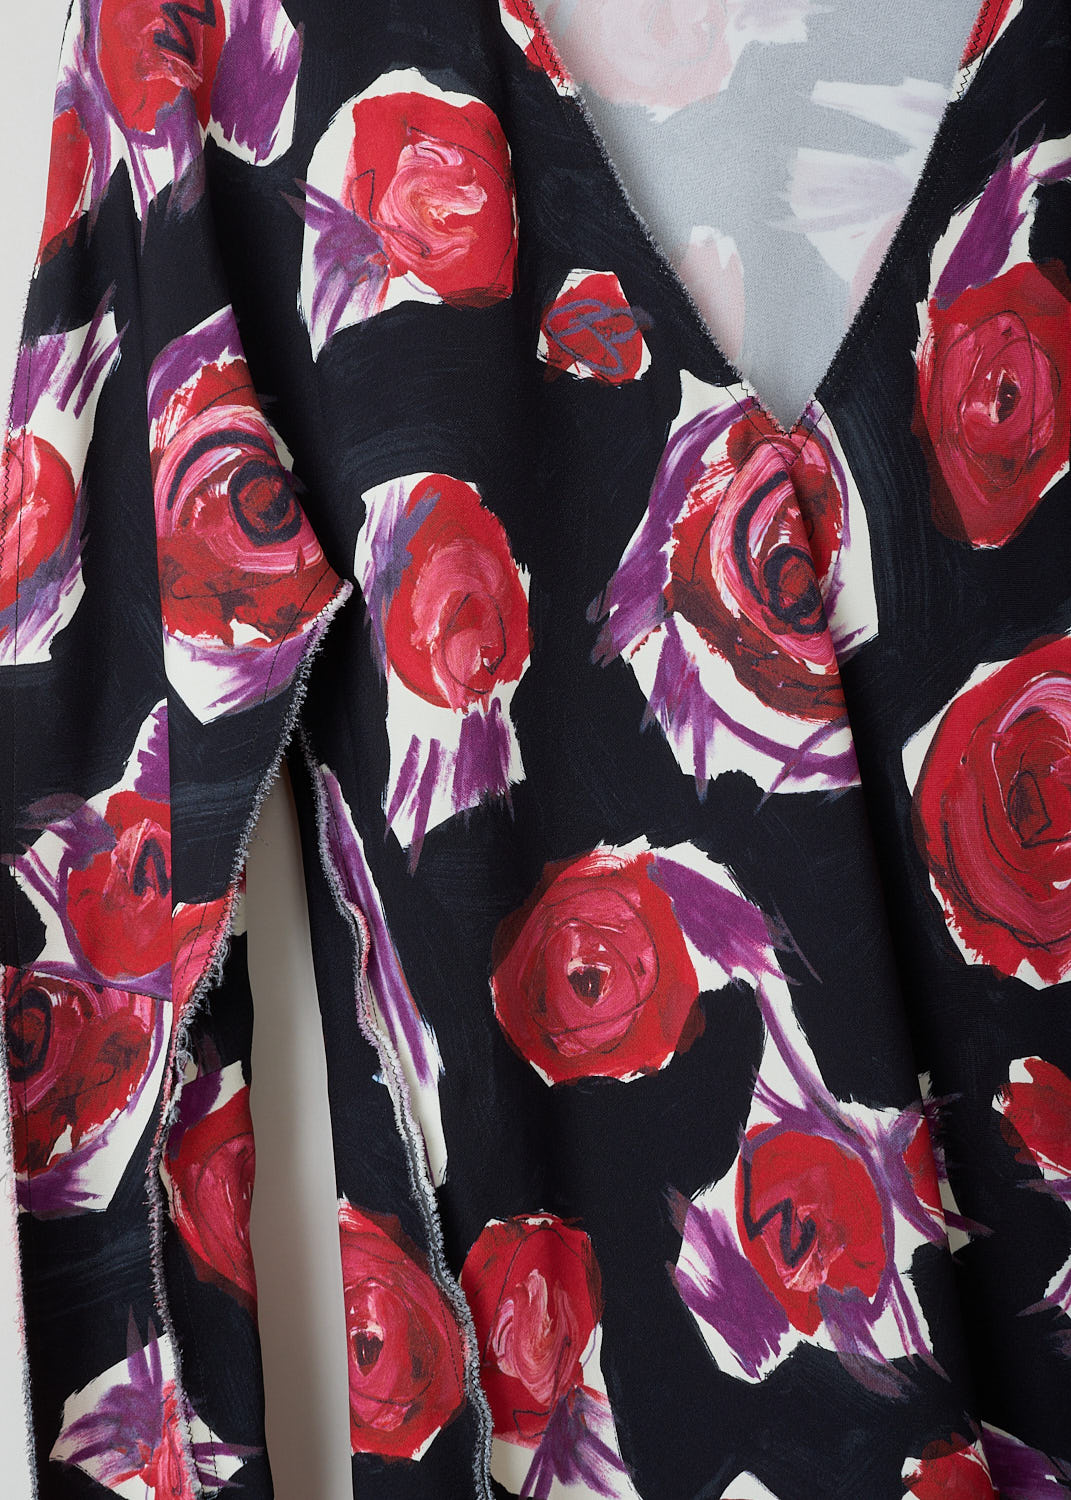 MARNI, ROSE PRINTED LONG SLEEVE TOP, CAMA0486A0_UTV908_SRN99, Print, Detail, This long sleeve top has a rose print. The top features a V-neckline, small slits on the sleeves and on either side. The top has a raw hemline throughout.
